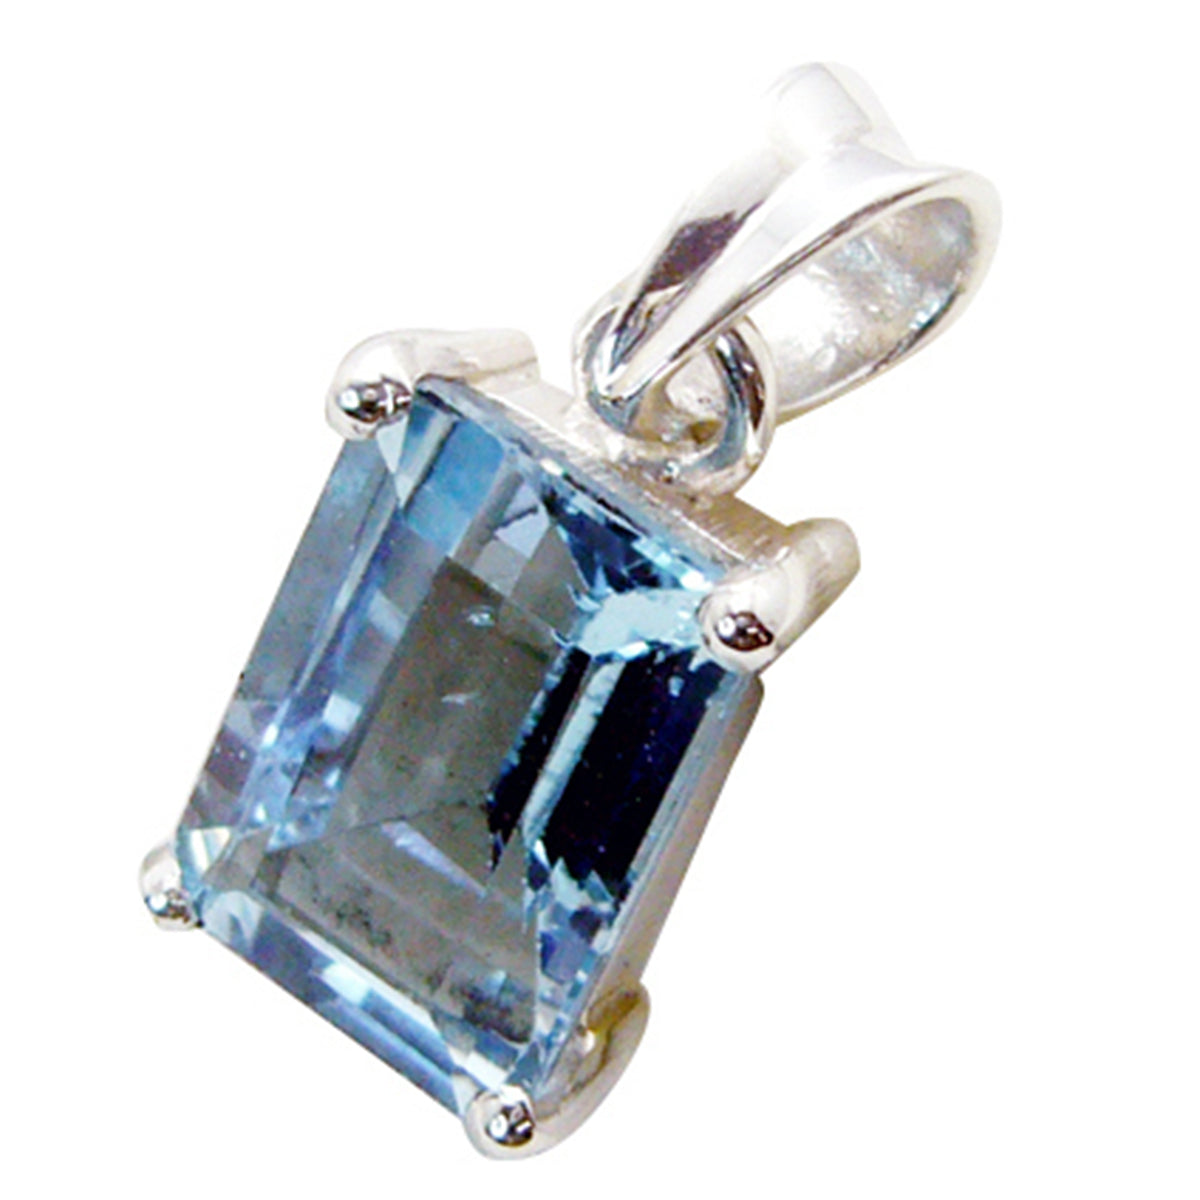 Riyo Nice Gemstone Octogon Faceted Blue Blue Topaz Sterling Silver Pendant mothers day gift